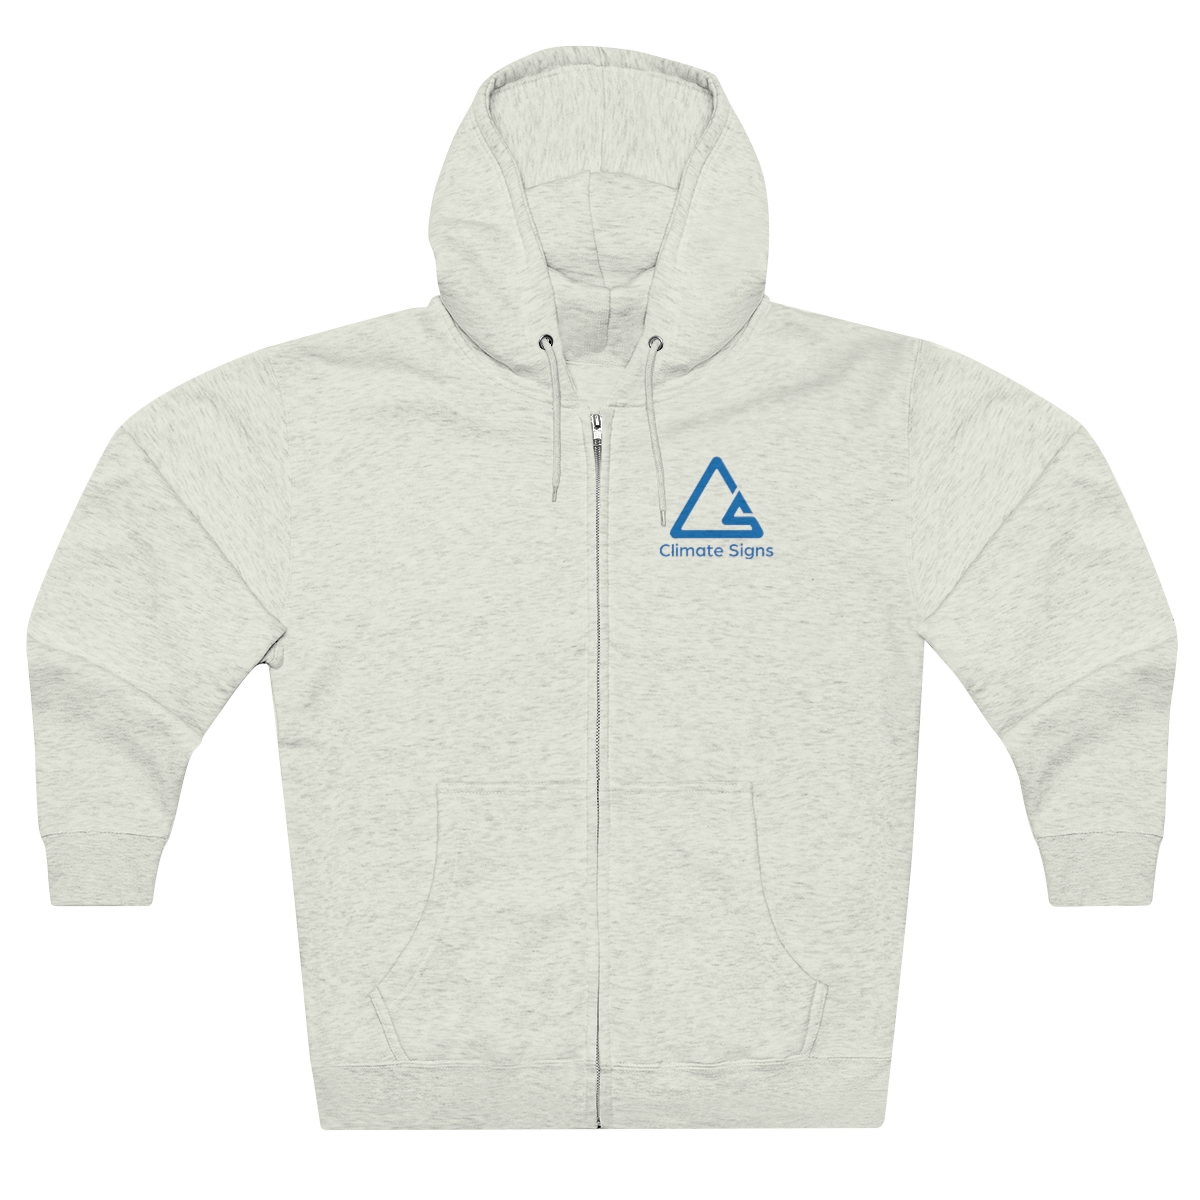 climate sign hoody